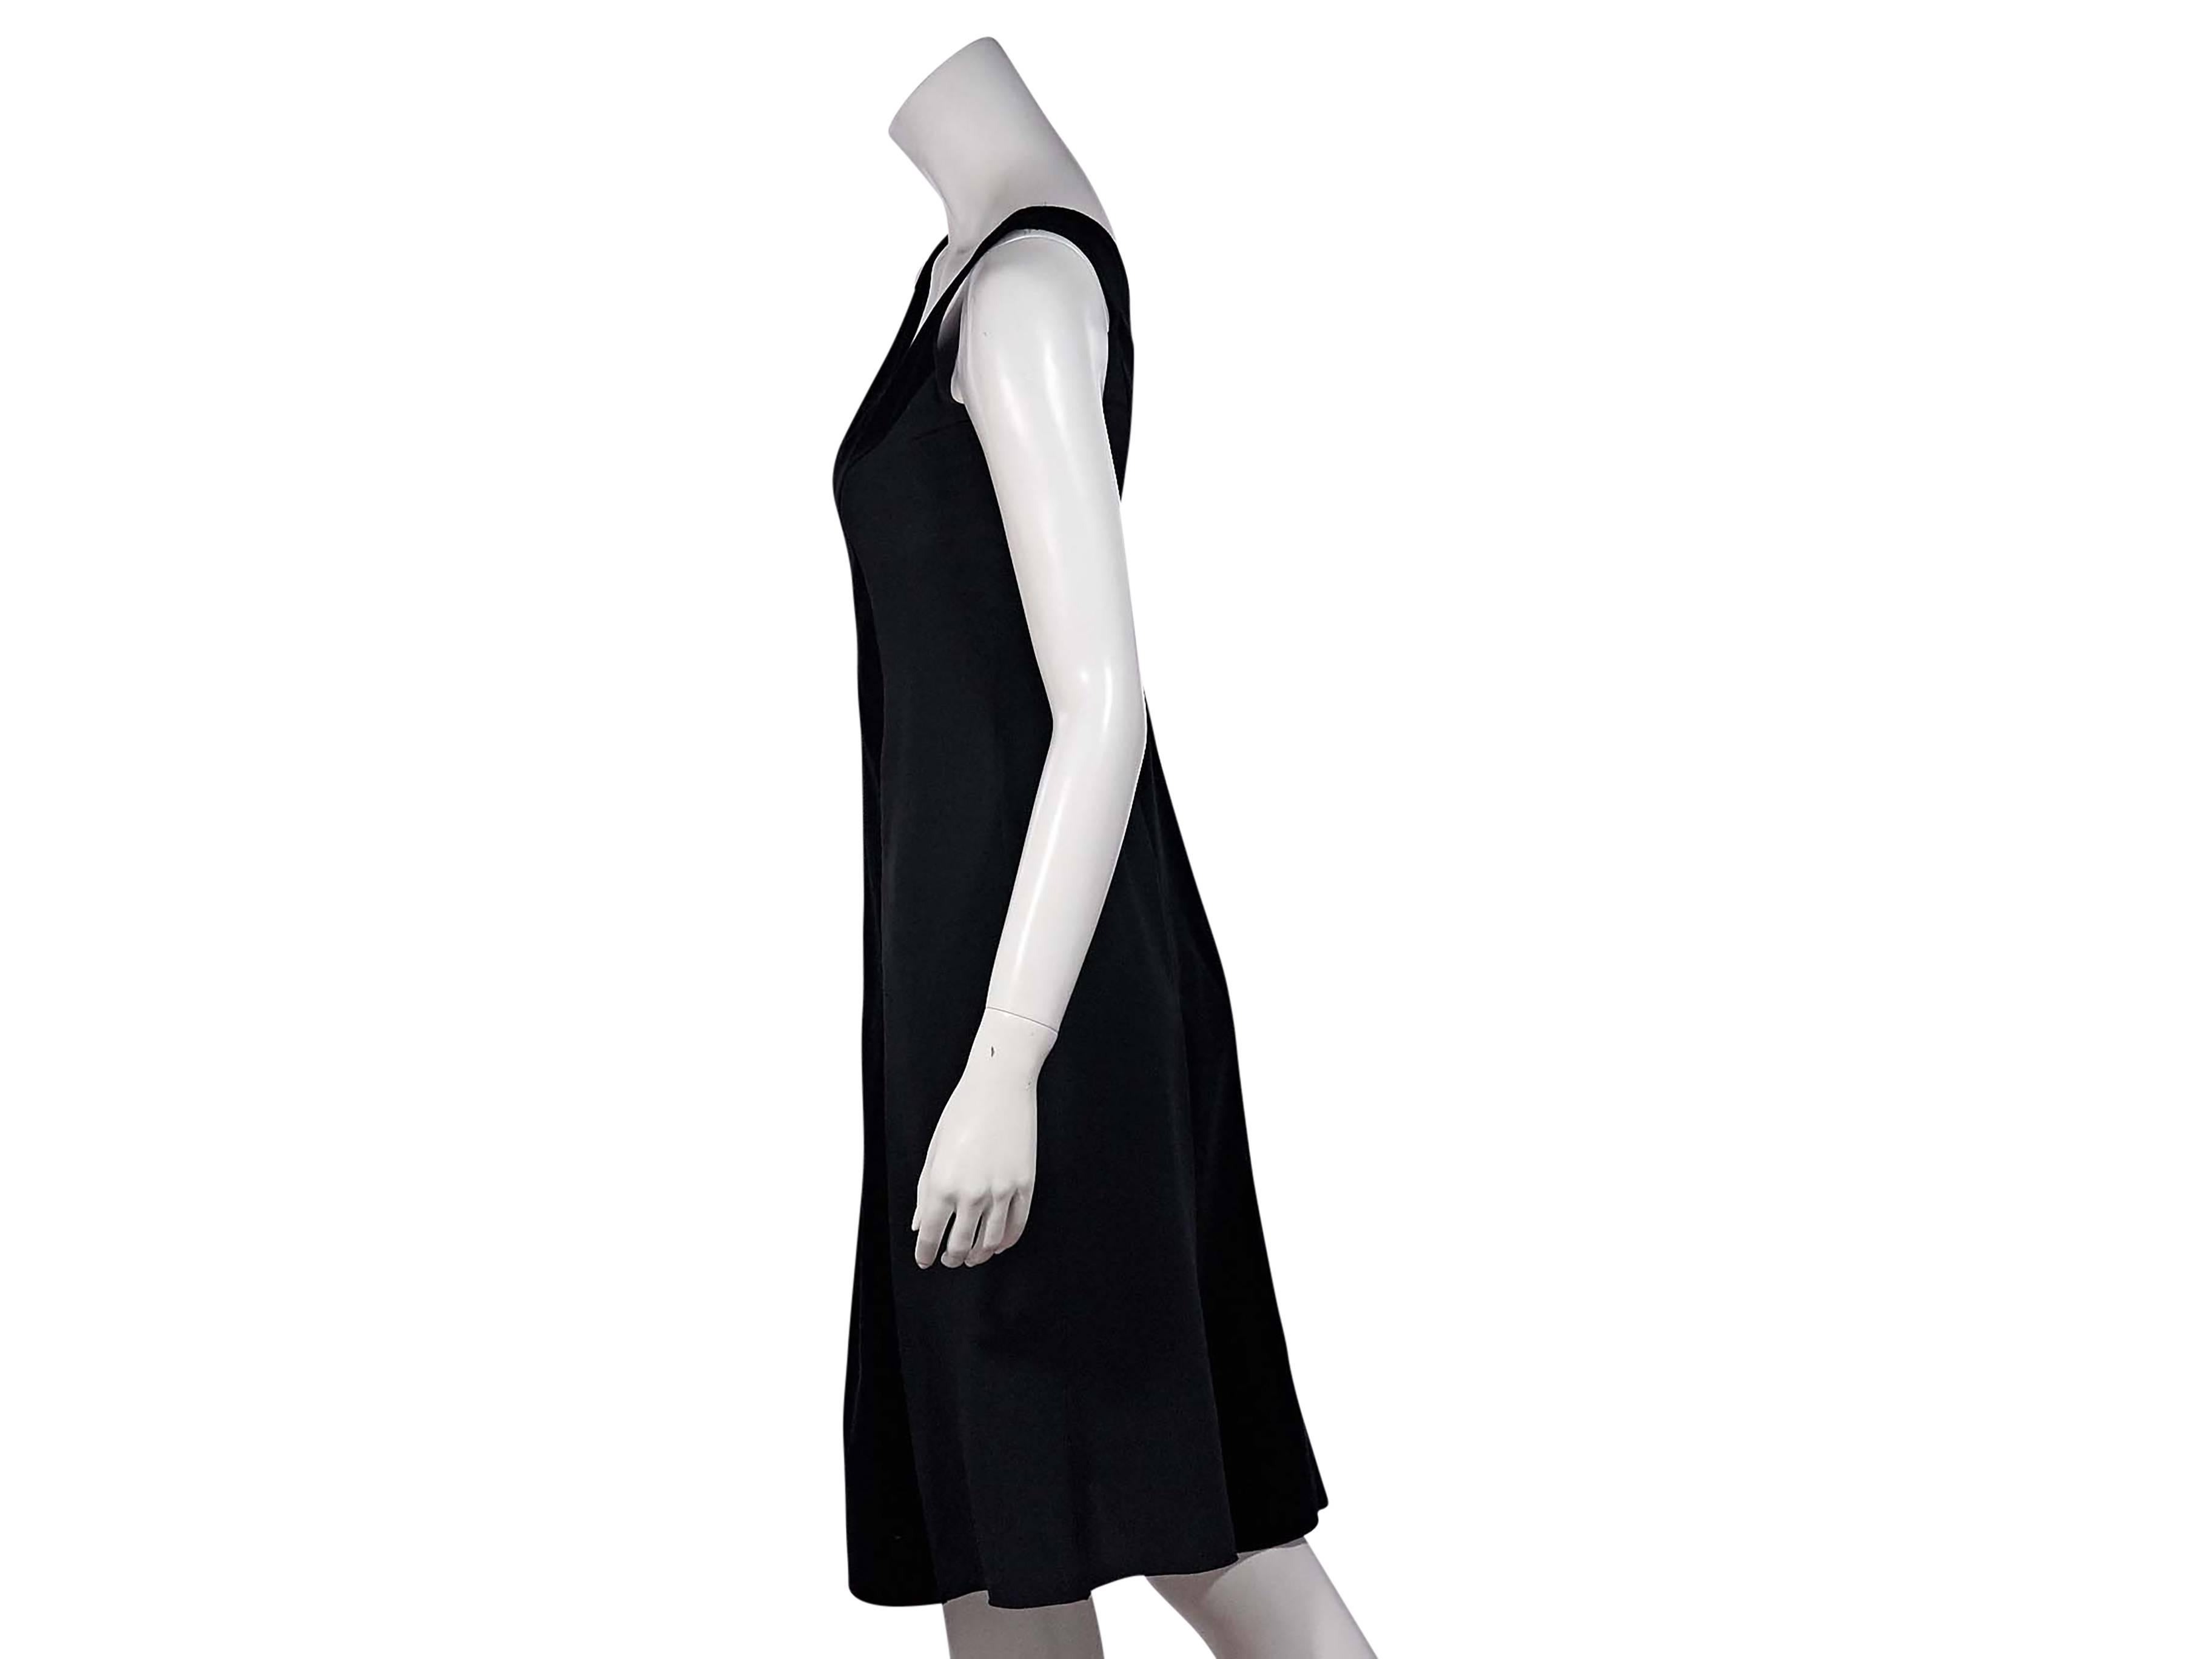 Product details: Black sheath dress by Prada. Accented with velvet front and back panels. Deep v-neck. Sleeveless. Concealed zip closure. 
Condition: Excellent. 
Est. Retail $ 828.00